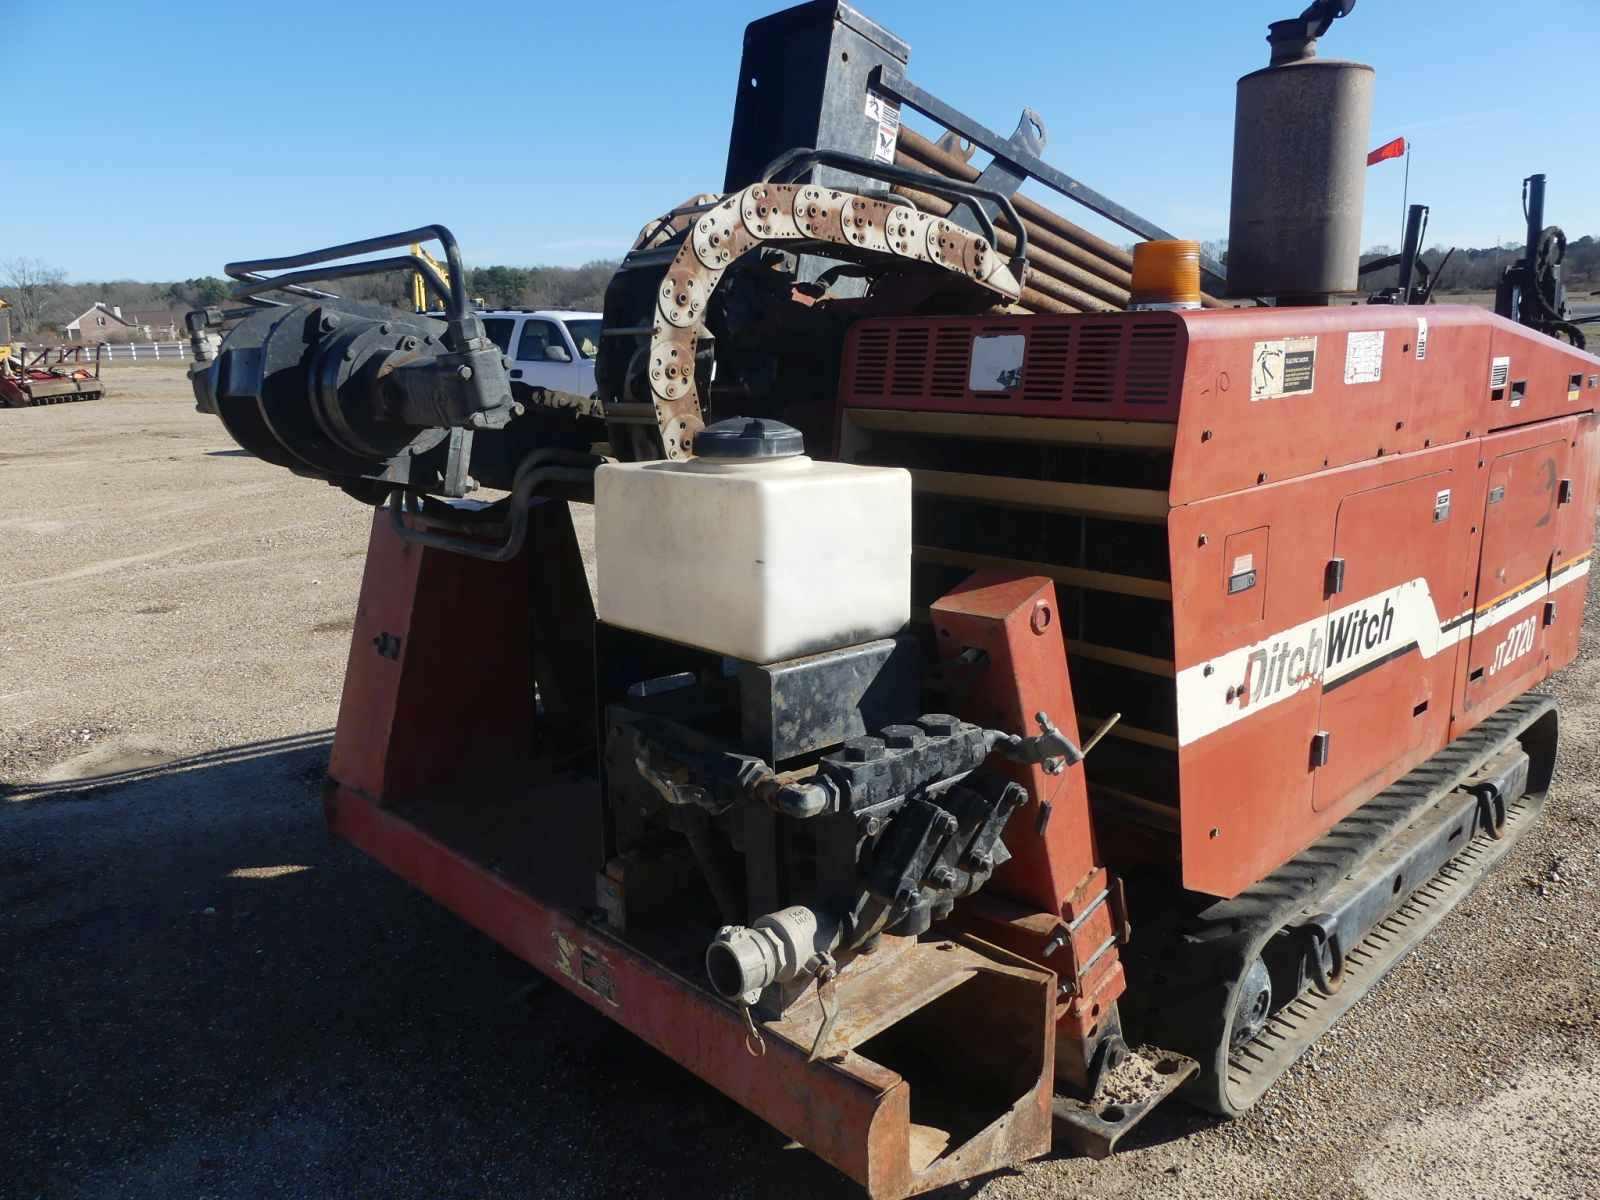 Ditch Witch JT2720 Boring Unit, s/n 2T2110: w/ Pipes, Meter Shows 5134 hrs